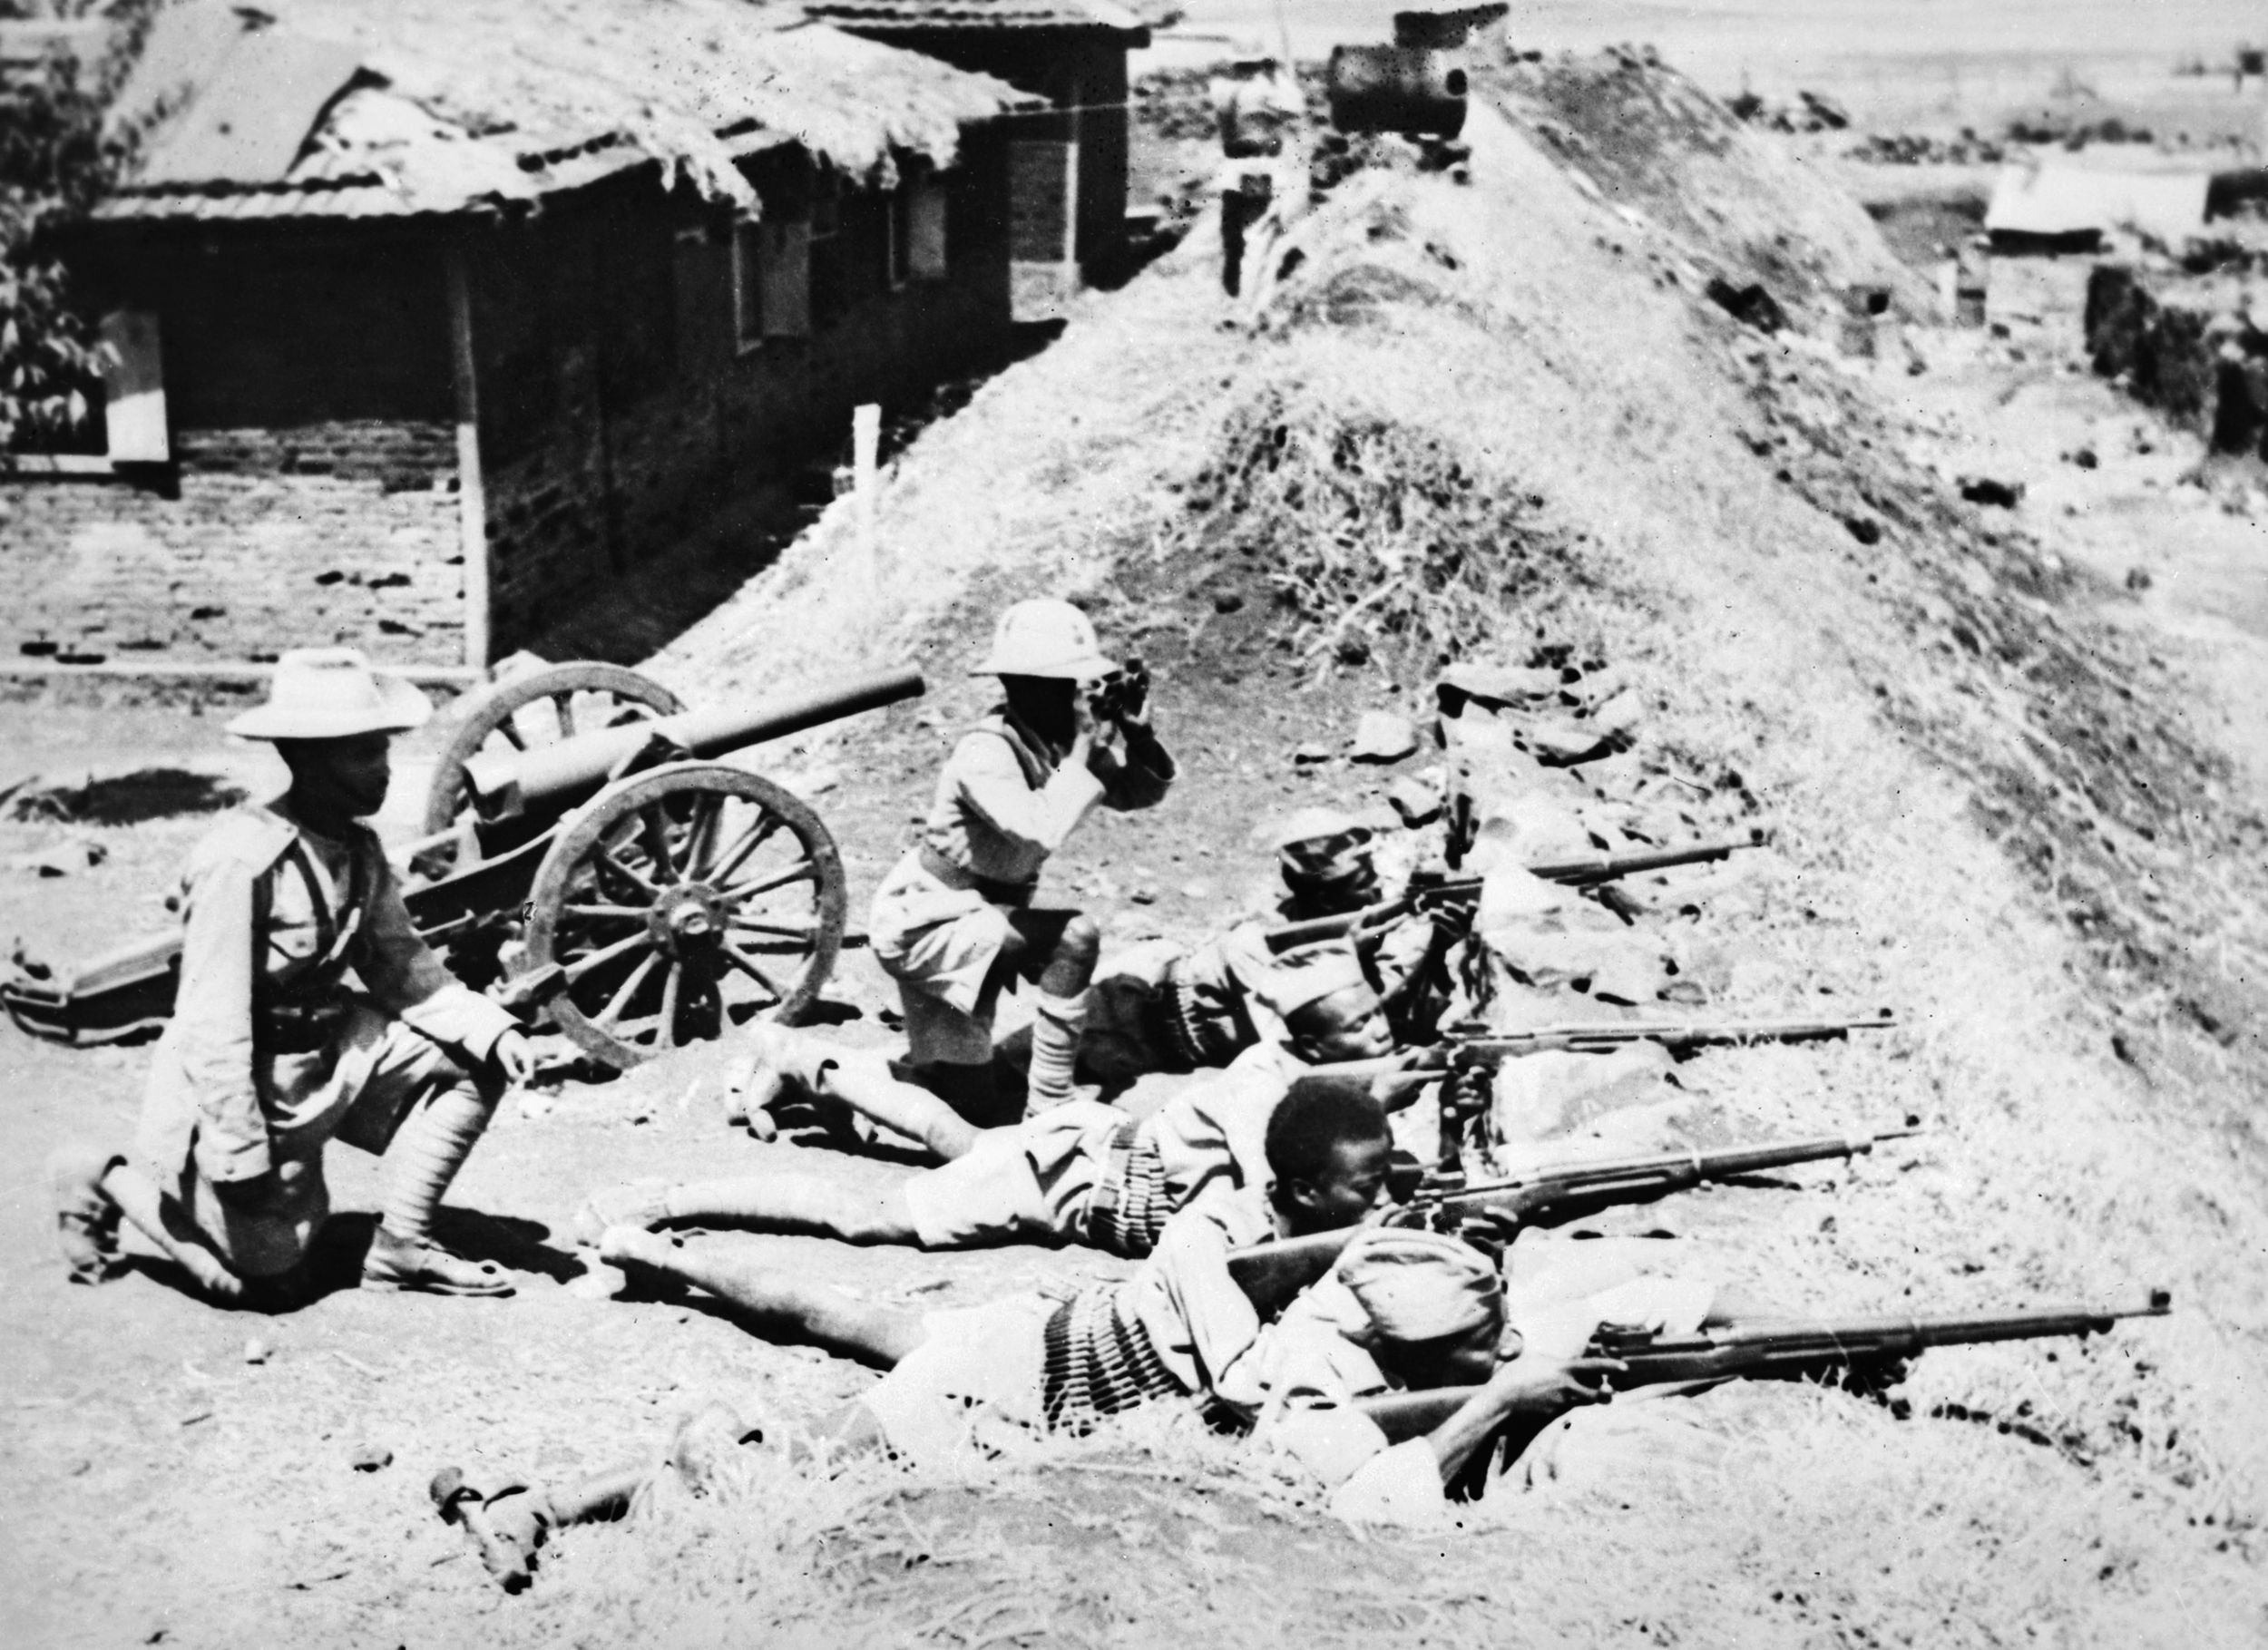 One officer directs riflemen into position, while another scans the horizon through binoculars as Abyssinian soldiers man positions along the rampart of a fort in Ethiopia. An antiquated artillery piece sits nearby.